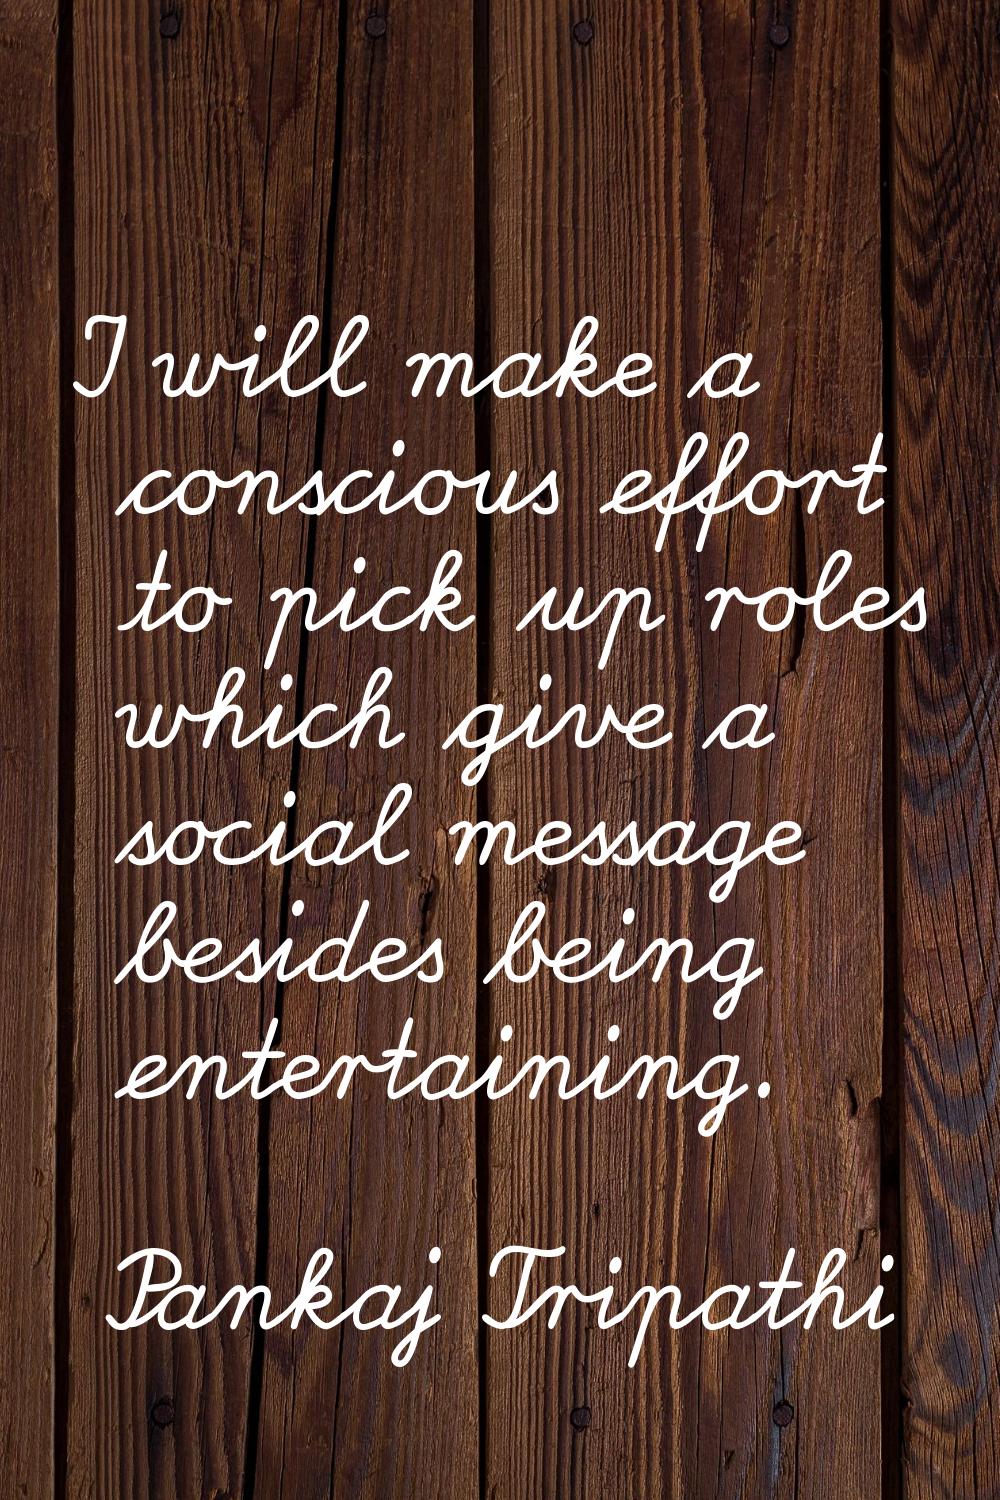 I will make a conscious effort to pick up roles which give a social message besides being entertain